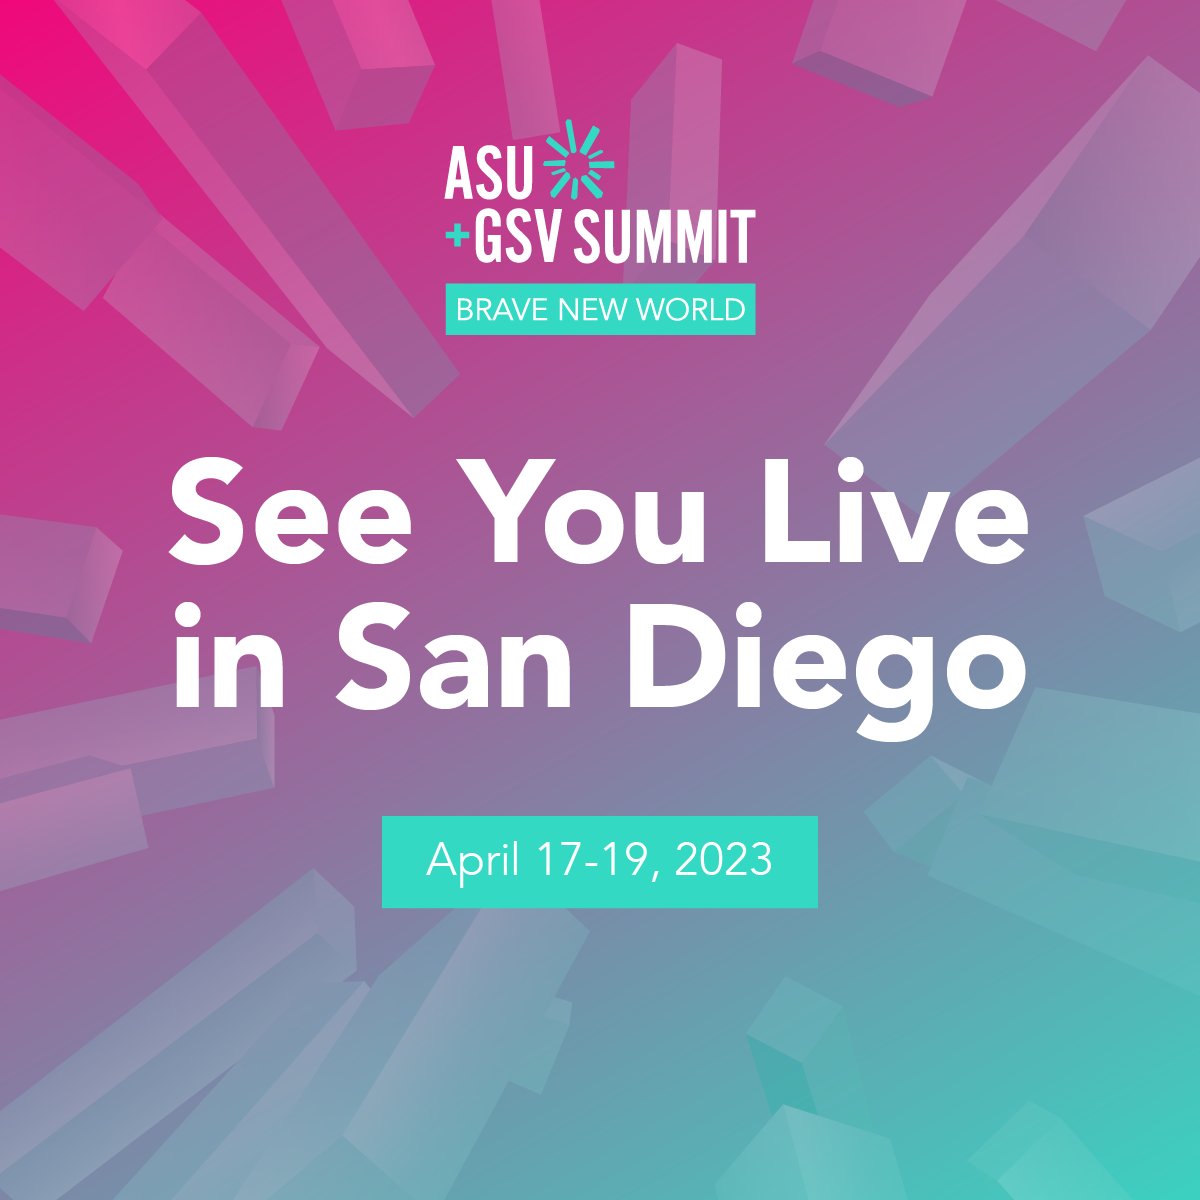 I will be attending @asugsvsummit - Brave New World today. If you can’t make it to #SanDiego, register here to join us virtually for free: cvent.me/W0nBQo #asugsvsummit